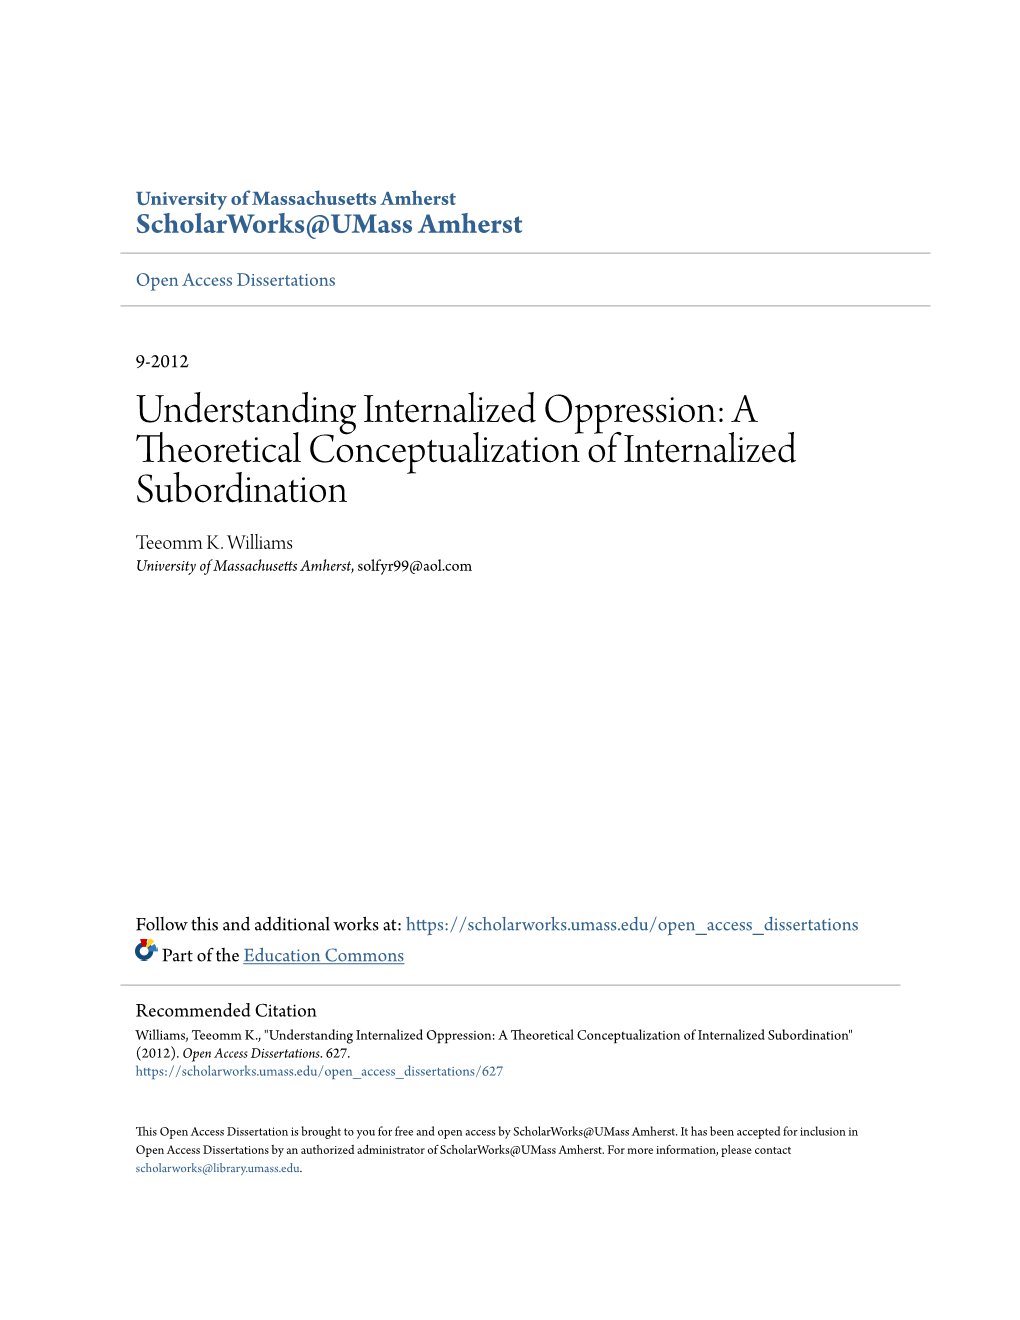 A Theoretical Conceptualization of Internalized Subordination Teeomm K